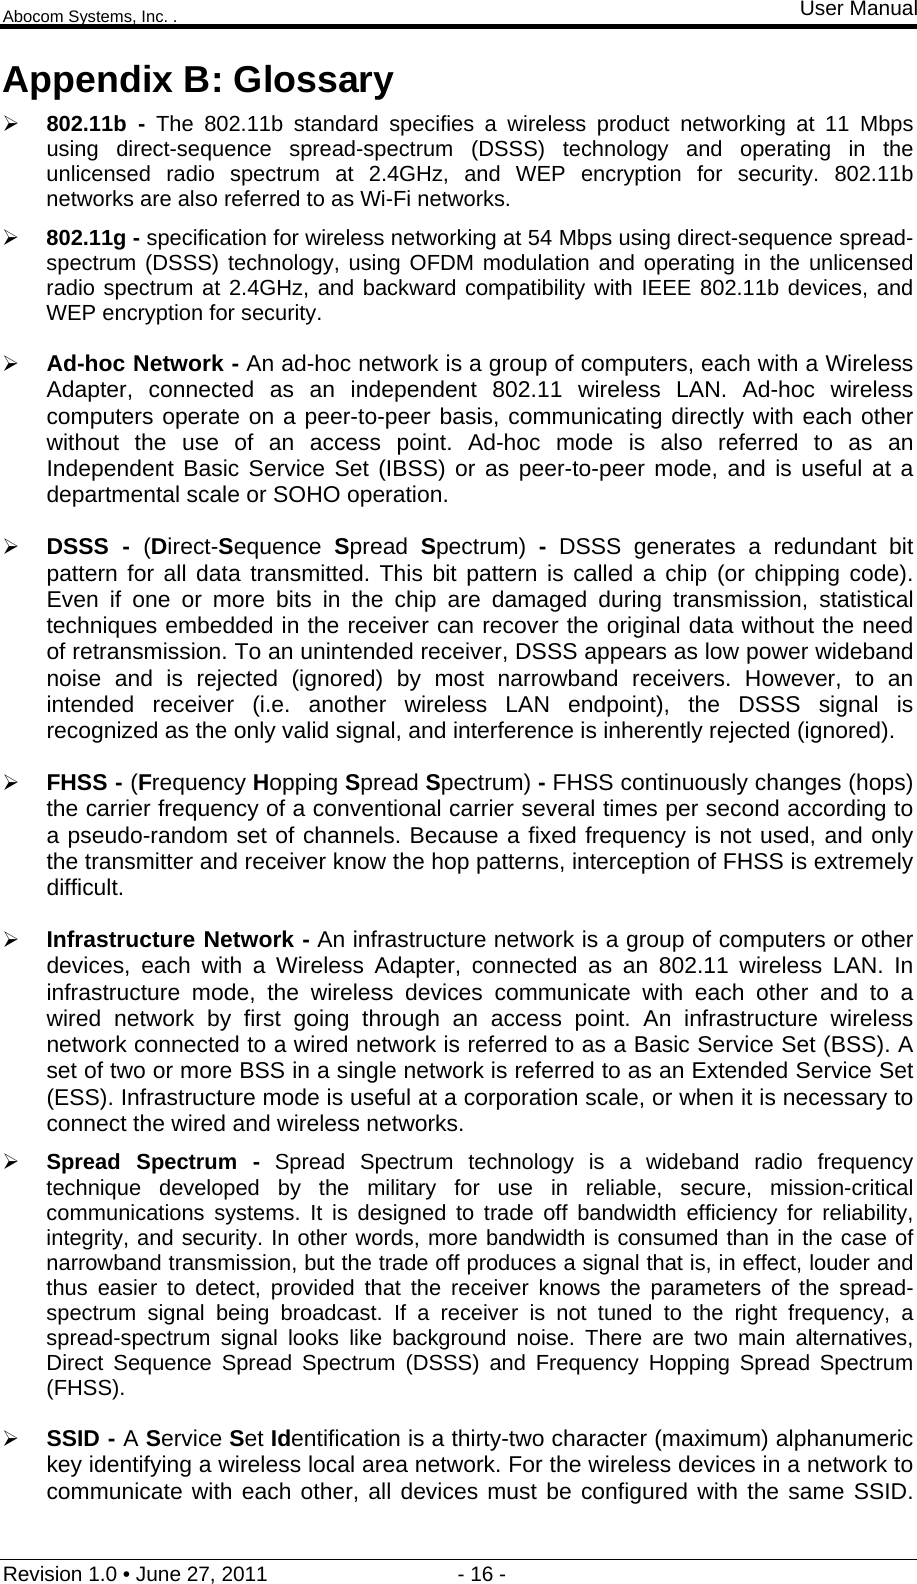 Abocom Systems, Inc. . User Manual Revision 1.0 • June 27, 2011                                 - 16 -                                                                Appendix B: Glossary  802.11b - The 802.11b standard specifies a wireless product networking at 11 Mbps using direct-sequence spread-spectrum (DSSS) technology and operating in the unlicensed radio spectrum at 2.4GHz, and WEP encryption for security. 802.11b networks are also referred to as Wi-Fi networks.  802.11g - specification for wireless networking at 54 Mbps using direct-sequence spread-spectrum (DSSS) technology, using OFDM modulation and operating in the unlicensed radio spectrum at 2.4GHz, and backward compatibility with IEEE 802.11b devices, and WEP encryption for security.  Ad-hoc Network - An ad-hoc network is a group of computers, each with a Wireless Adapter, connected as an independent 802.11 wireless LAN. Ad-hoc wireless computers operate on a peer-to-peer basis, communicating directly with each other without the use of an access point. Ad-hoc mode is also referred to as an Independent Basic Service Set (IBSS) or as peer-to-peer mode, and is useful at a departmental scale or SOHO operation.   DSSS - (Direct-Sequence  Spread  Spectrum)  - DSSS generates a redundant bit pattern for all data transmitted. This bit pattern is called a chip (or chipping code). Even if one or more bits in the chip are damaged during transmission, statistical techniques embedded in the receiver can recover the original data without the need of retransmission. To an unintended receiver, DSSS appears as low power wideband noise and is rejected (ignored) by most narrowband receivers. However, to an intended receiver (i.e. another wireless LAN endpoint), the DSSS signal is recognized as the only valid signal, and interference is inherently rejected (ignored).  FHSS - (Frequency Hopping Spread Spectrum) - FHSS continuously changes (hops) the carrier frequency of a conventional carrier several times per second according to a pseudo-random set of channels. Because a fixed frequency is not used, and only the transmitter and receiver know the hop patterns, interception of FHSS is extremely difficult.  Infrastructure Network - An infrastructure network is a group of computers or other devices, each with a Wireless Adapter, connected as an 802.11 wireless LAN. In infrastructure mode, the wireless devices communicate with each other and to a wired network by first going through an access point. An infrastructure wireless network connected to a wired network is referred to as a Basic Service Set (BSS). A set of two or more BSS in a single network is referred to as an Extended Service Set (ESS). Infrastructure mode is useful at a corporation scale, or when it is necessary to connect the wired and wireless networks.   Spread Spectrum - Spread Spectrum technology is a wideband radio frequency technique developed by the military for use in reliable, secure, mission-critical communications systems. It is designed to trade off bandwidth efficiency for reliability, integrity, and security. In other words, more bandwidth is consumed than in the case of narrowband transmission, but the trade off produces a signal that is, in effect, louder and thus easier to detect, provided that the receiver knows the parameters of the spread-spectrum signal being broadcast. If a receiver is not tuned to the right frequency, a spread-spectrum signal looks like background noise. There are two main alternatives, Direct Sequence Spread Spectrum (DSSS) and Frequency Hopping Spread Spectrum (FHSS).  SSID - A Service Set Identification is a thirty-two character (maximum) alphanumeric key identifying a wireless local area network. For the wireless devices in a network to communicate with each other, all devices must be configured with the same SSID. 